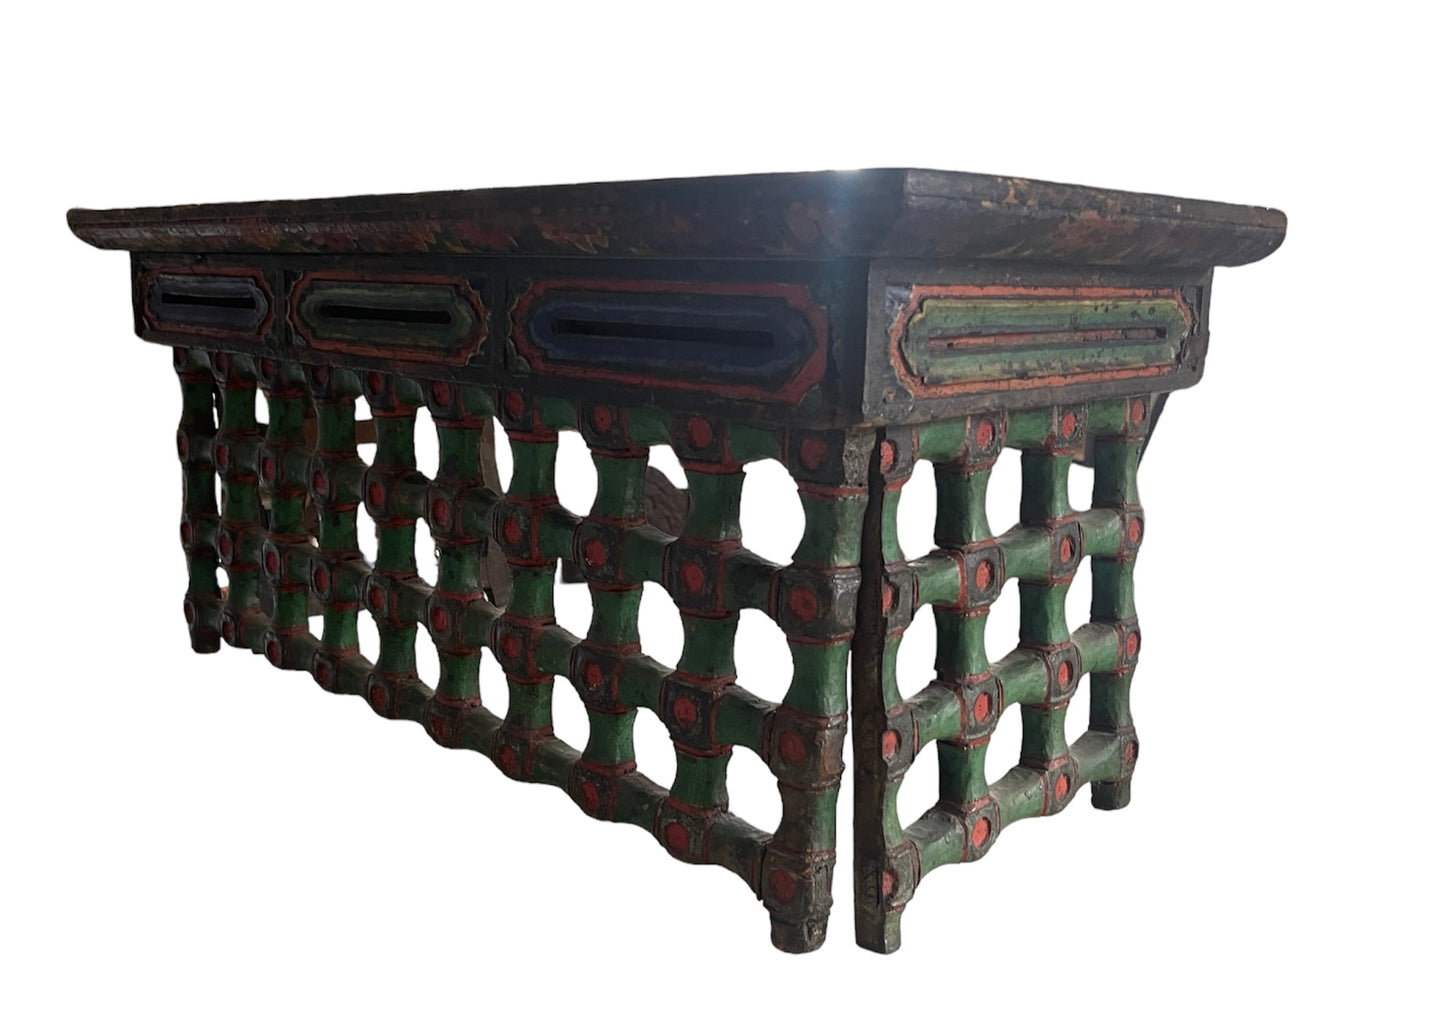 Antique Tibetan scripture reading table with carved latticed Front.